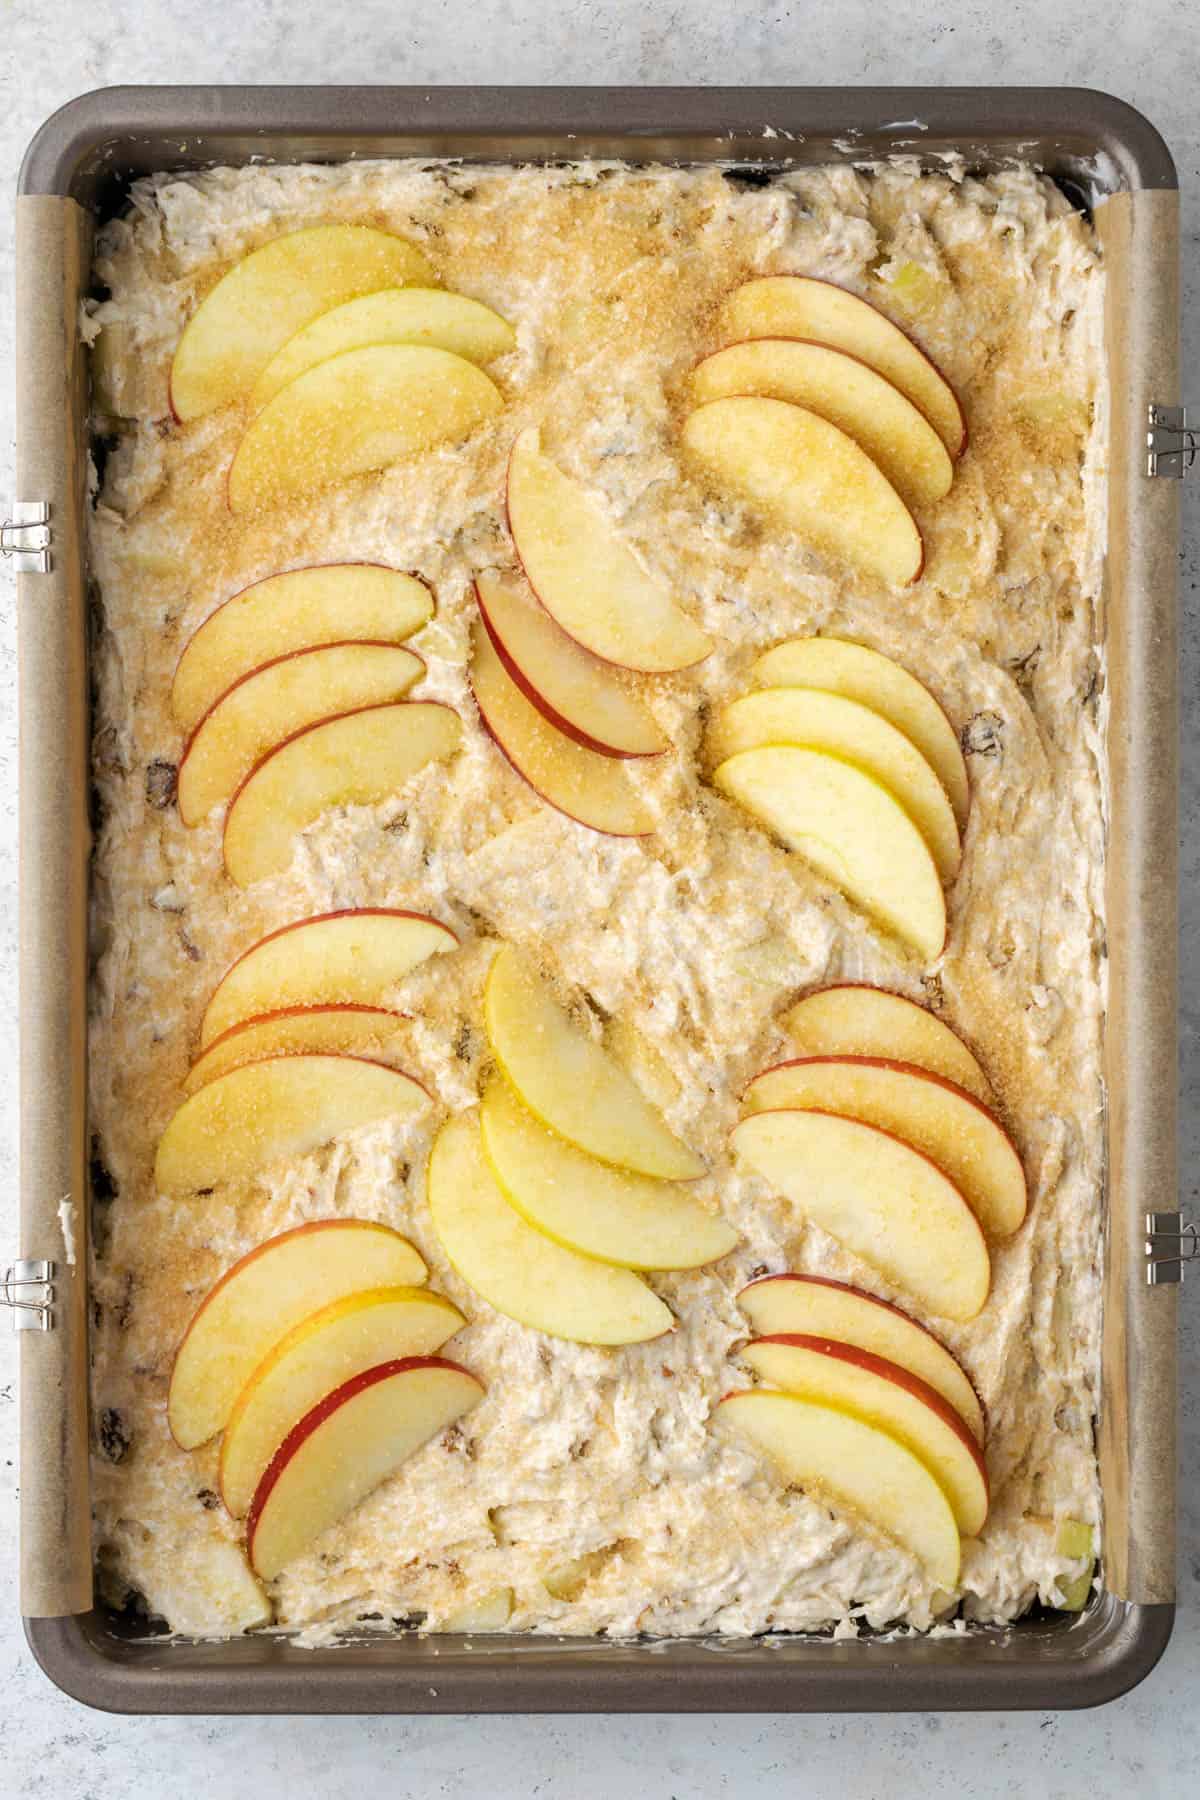 Unbaked gluten free apple cake in a 9x13 pan topped with slices of fresh apples.